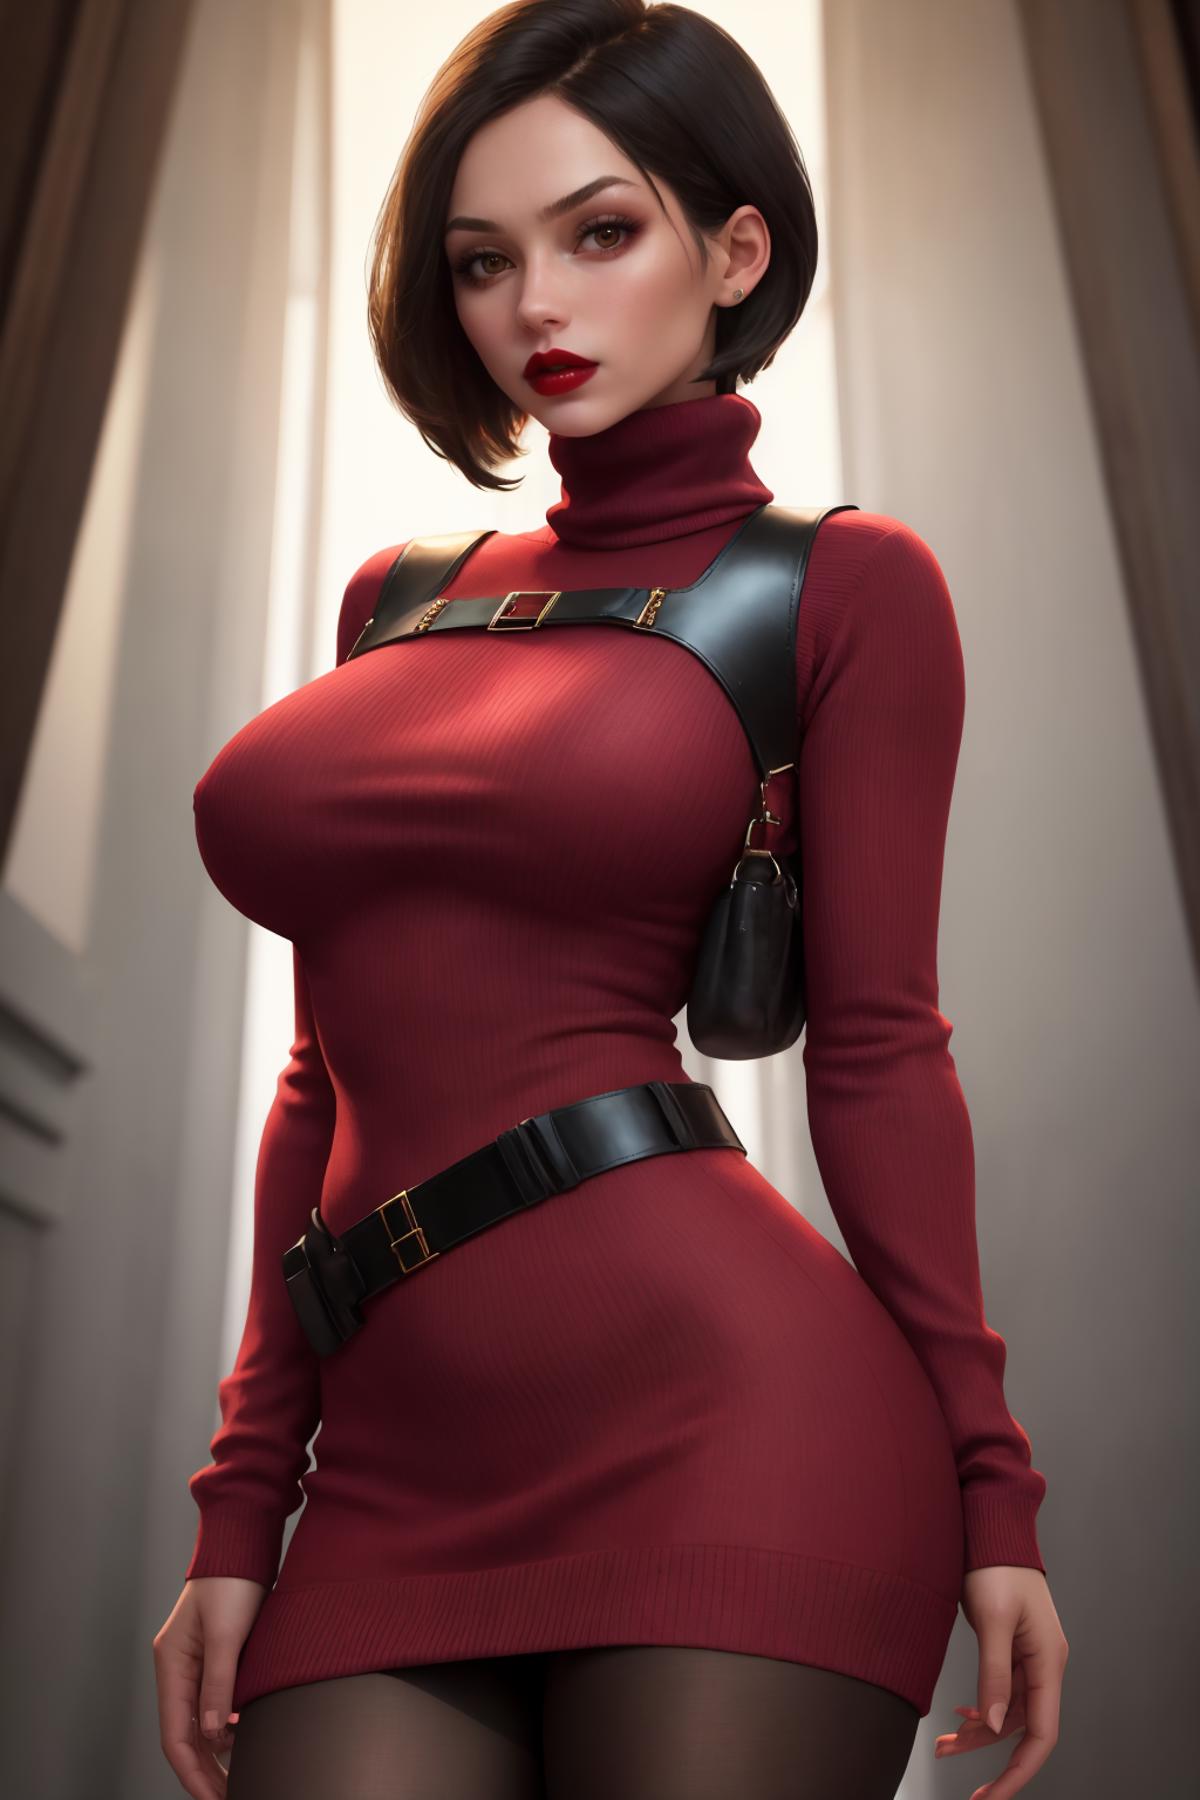 Ada Wong (Resident Evil) LoRA | 4 Outfits image by richyrich515